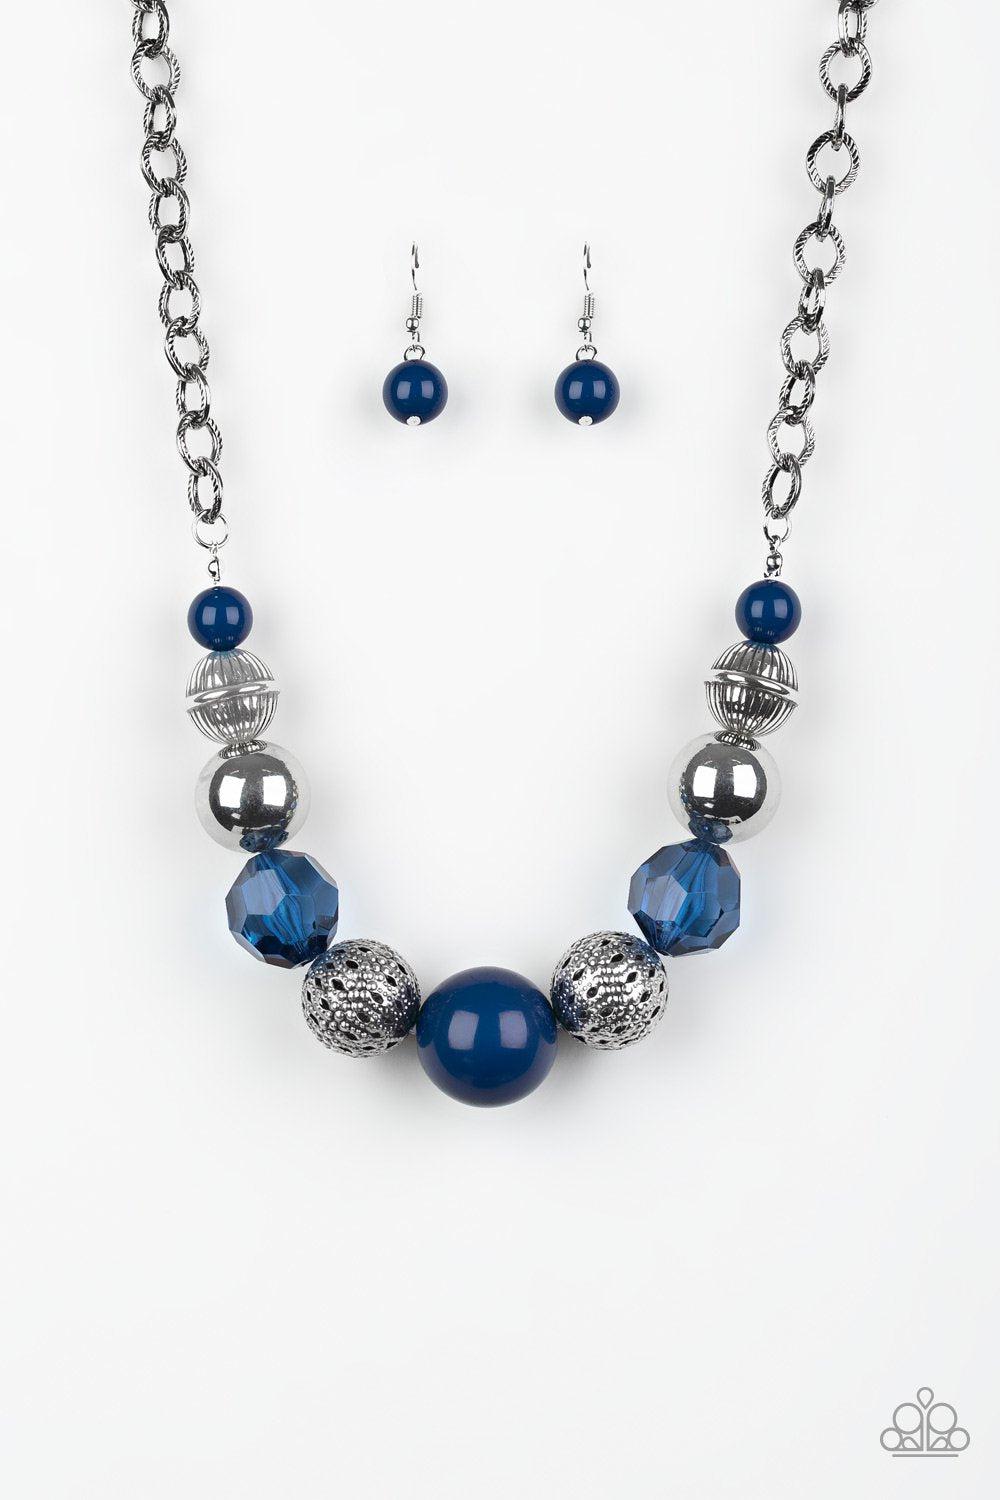 Sugar, Sugar Blue and Silver Necklace and matching Earrings - Paparazzi Accessories-CarasShop.com - $5 Jewelry by Cara Jewels